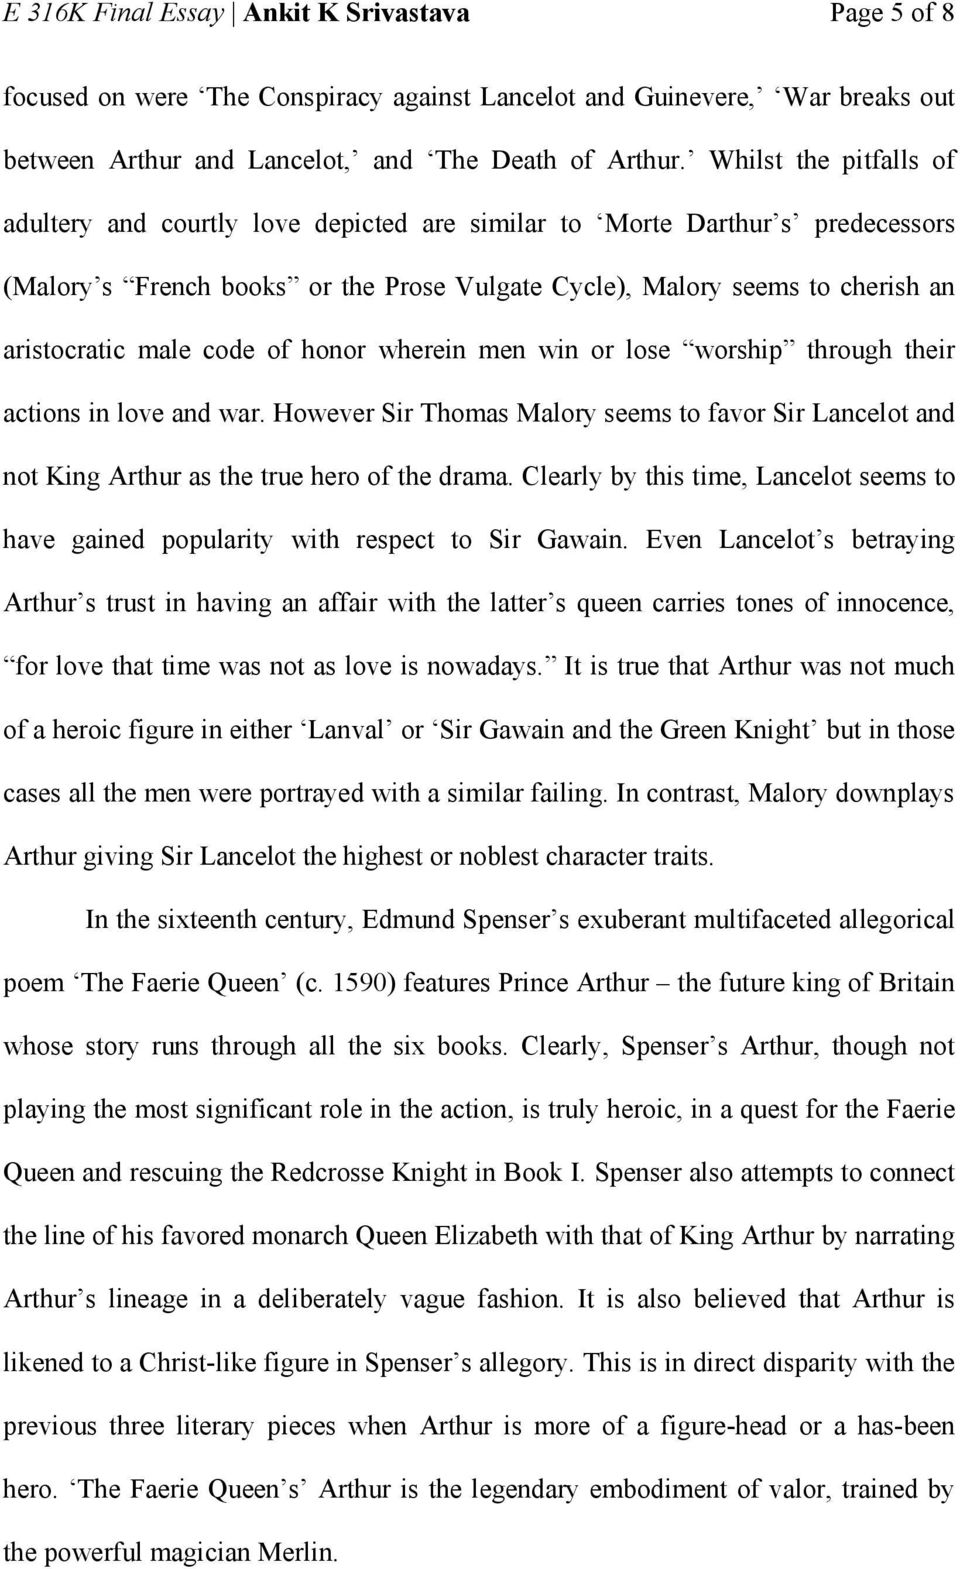 code of honor wherein men win or lose worship through their actions in love and war. However Sir Thomas Malory seems to favor Sir Lancelot and not King Arthur as the true hero of the drama.